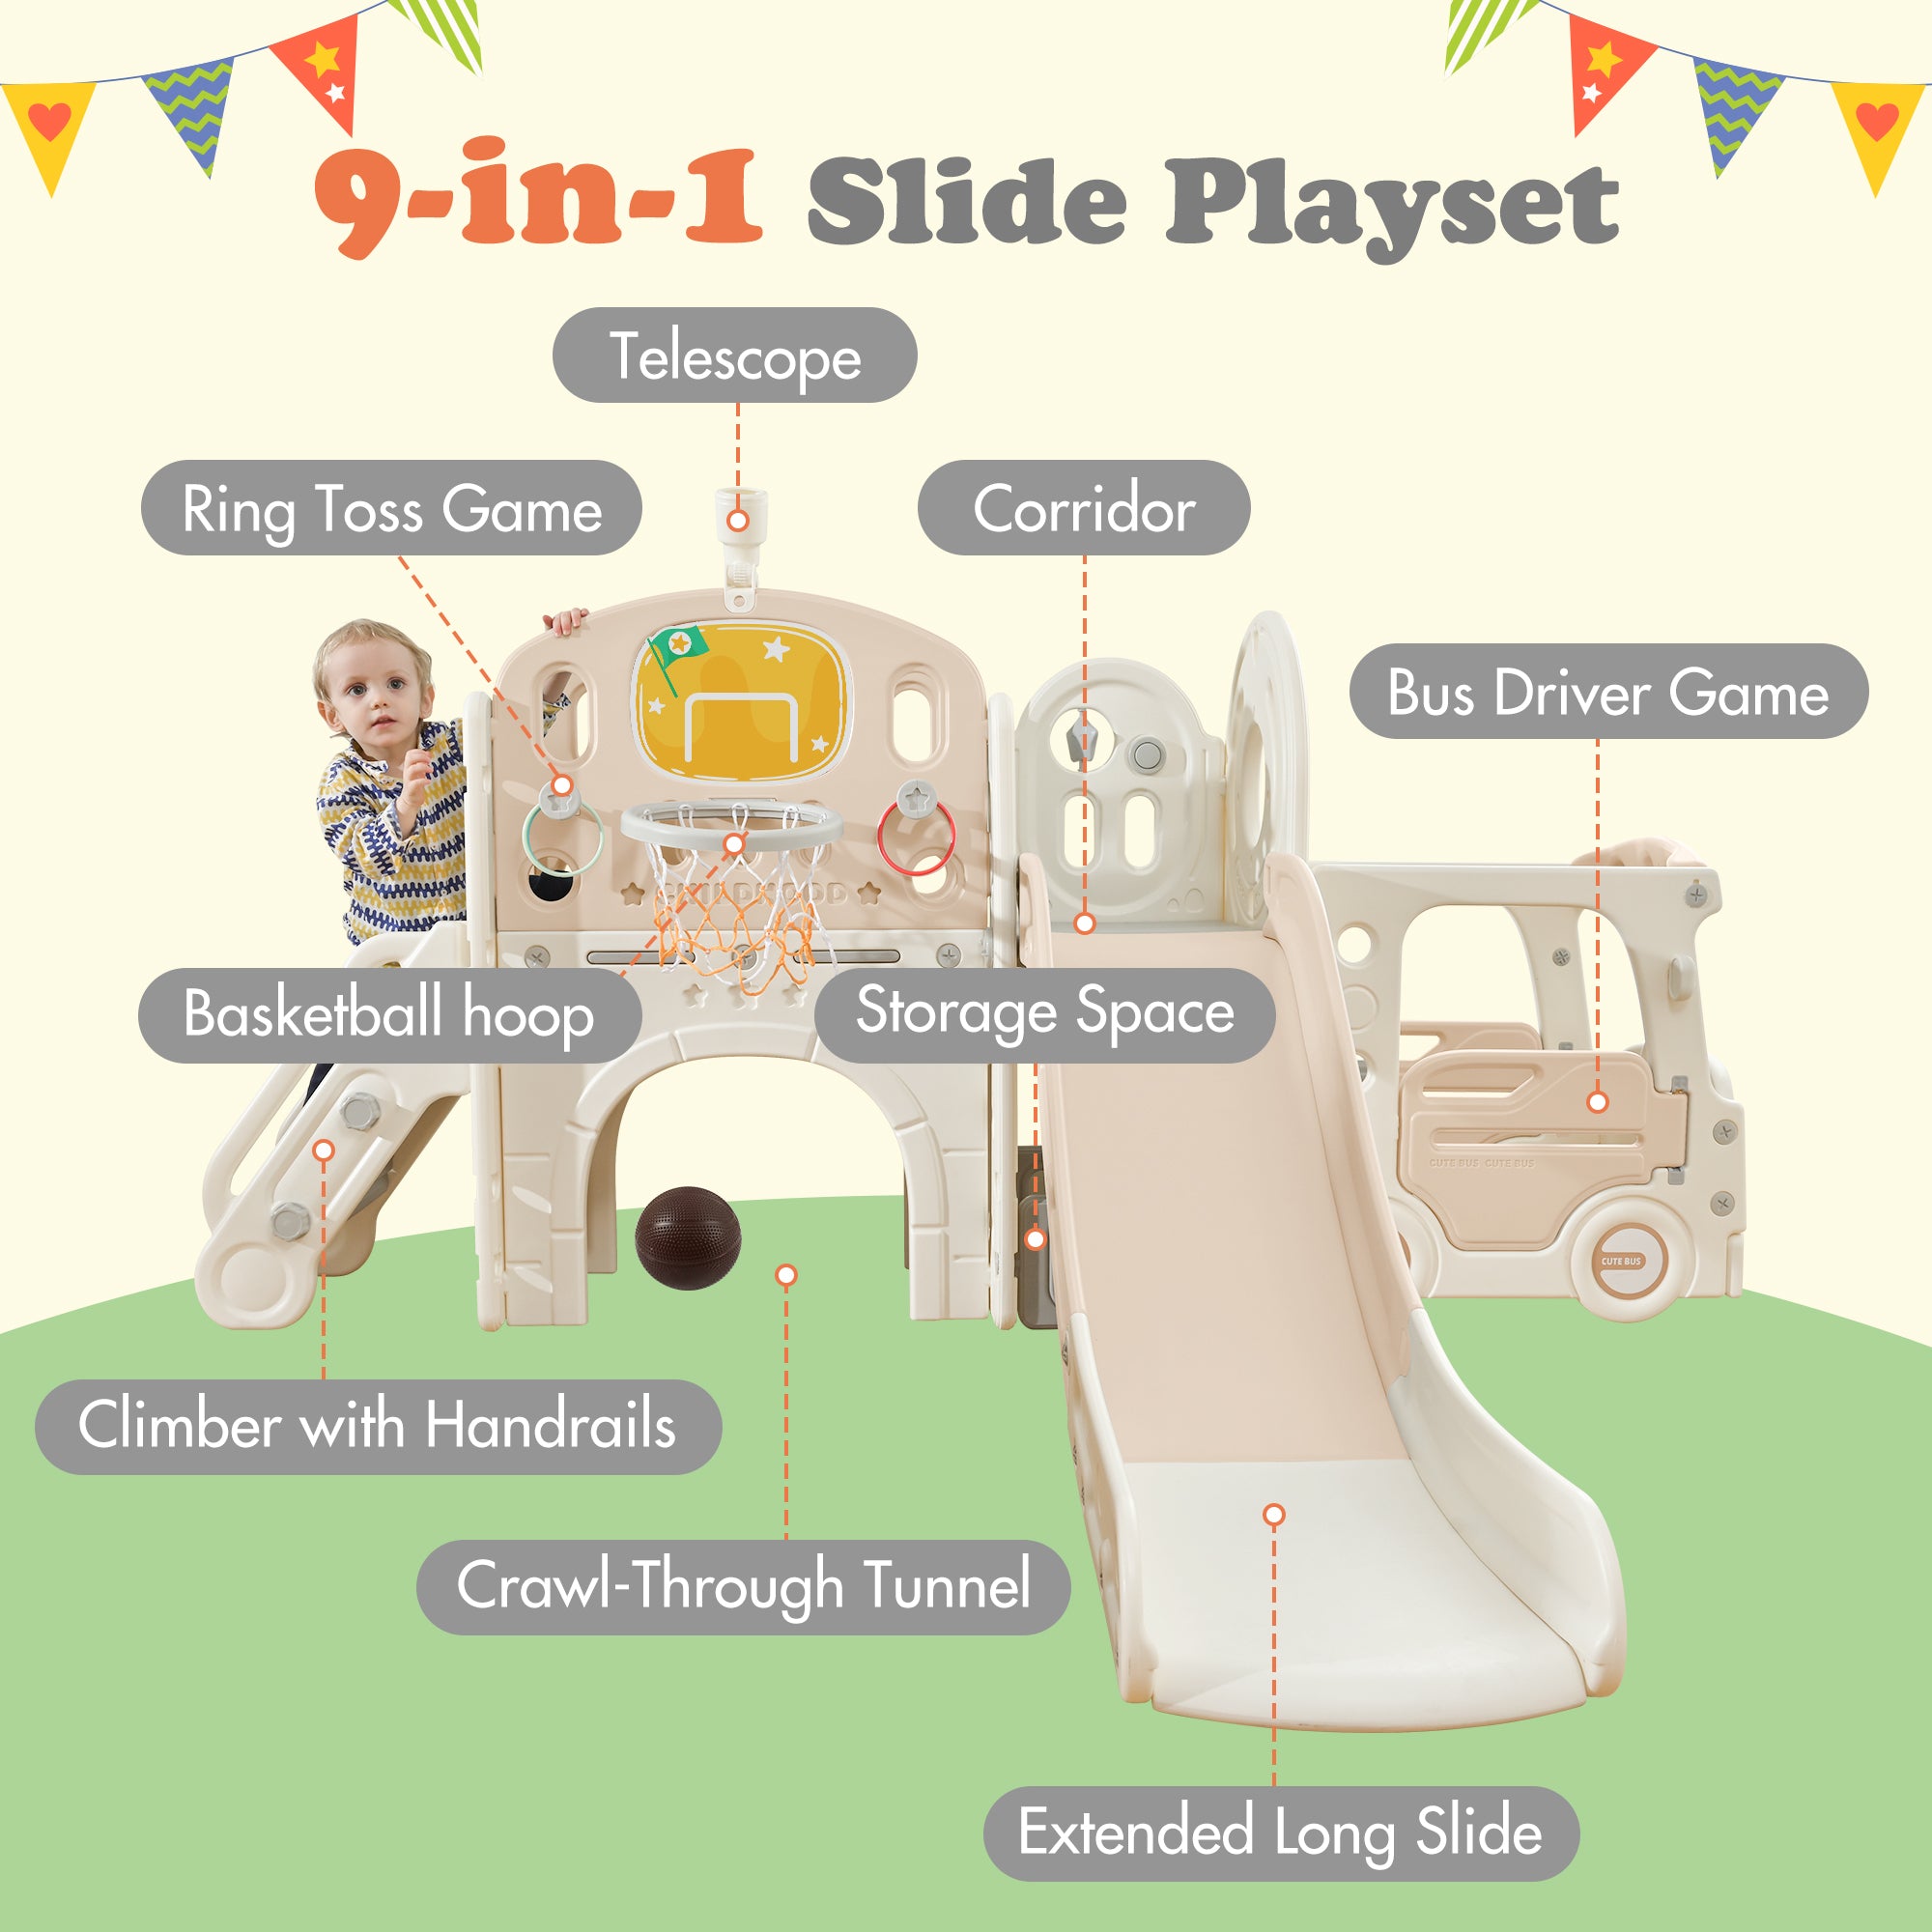 Kids Slide Playset Structure 9 in 1, Freestanding Castle Climbing Crawling Playhouse with Slide, Arch Tunnel, Ring Toss, Realistic Bus Model and Basketball Hoop, Toy Storage Organizer for Toddlers